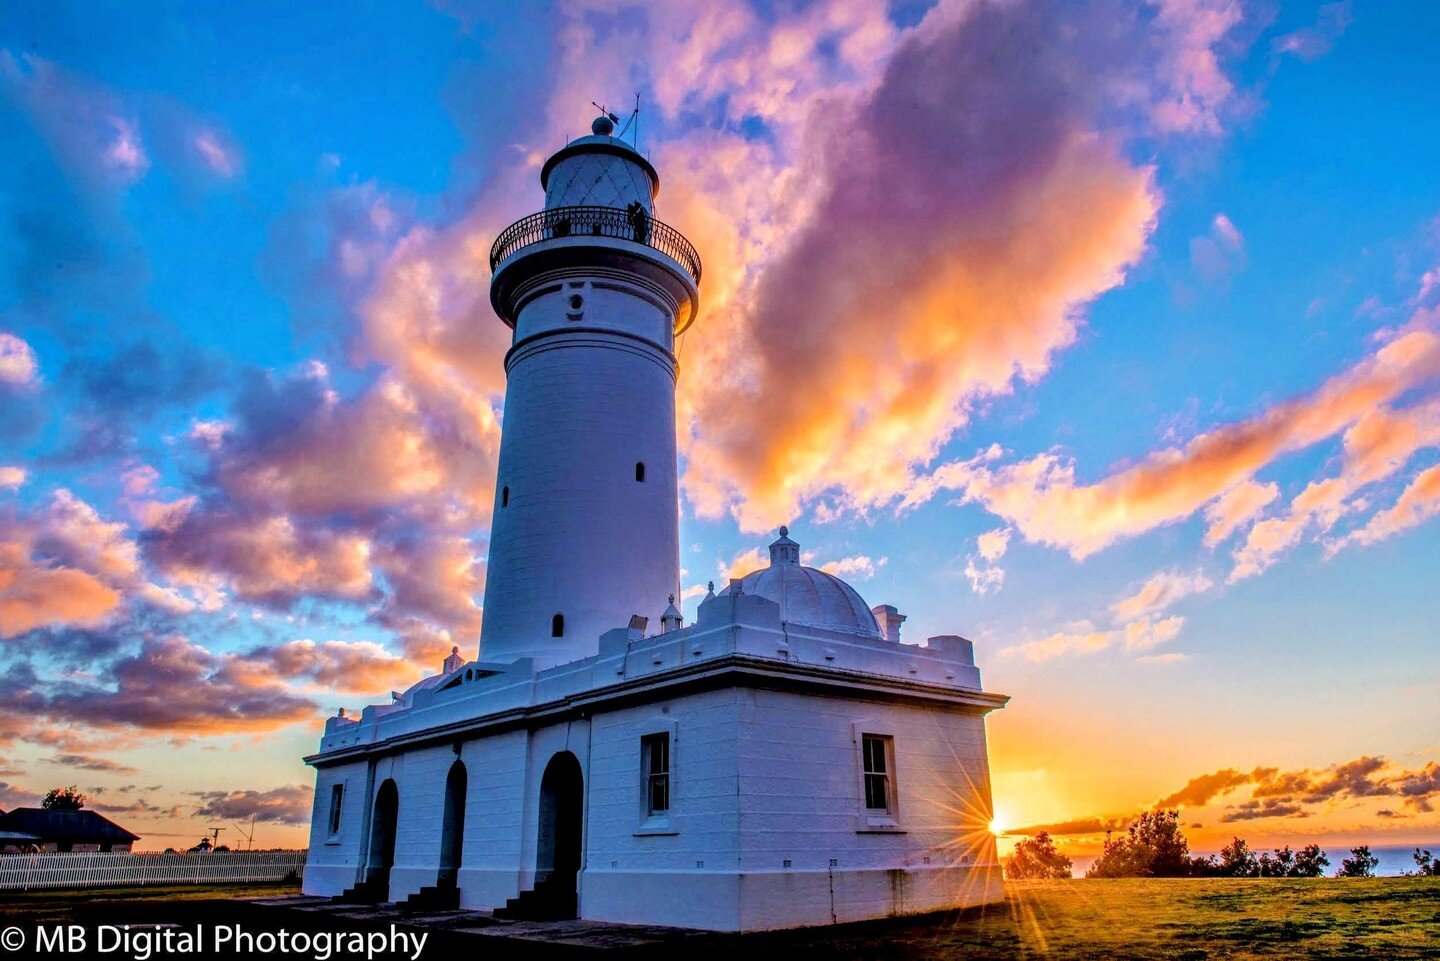 Hello sunshine!
The only kind of sunrises I don't like are the ones that I missed!
Sunrise at Macquarie Lighthouse, Vaucluse. This is Australia's first lighthouse right here in the heart of Sydney. I love going here in the mornings to be free, breath